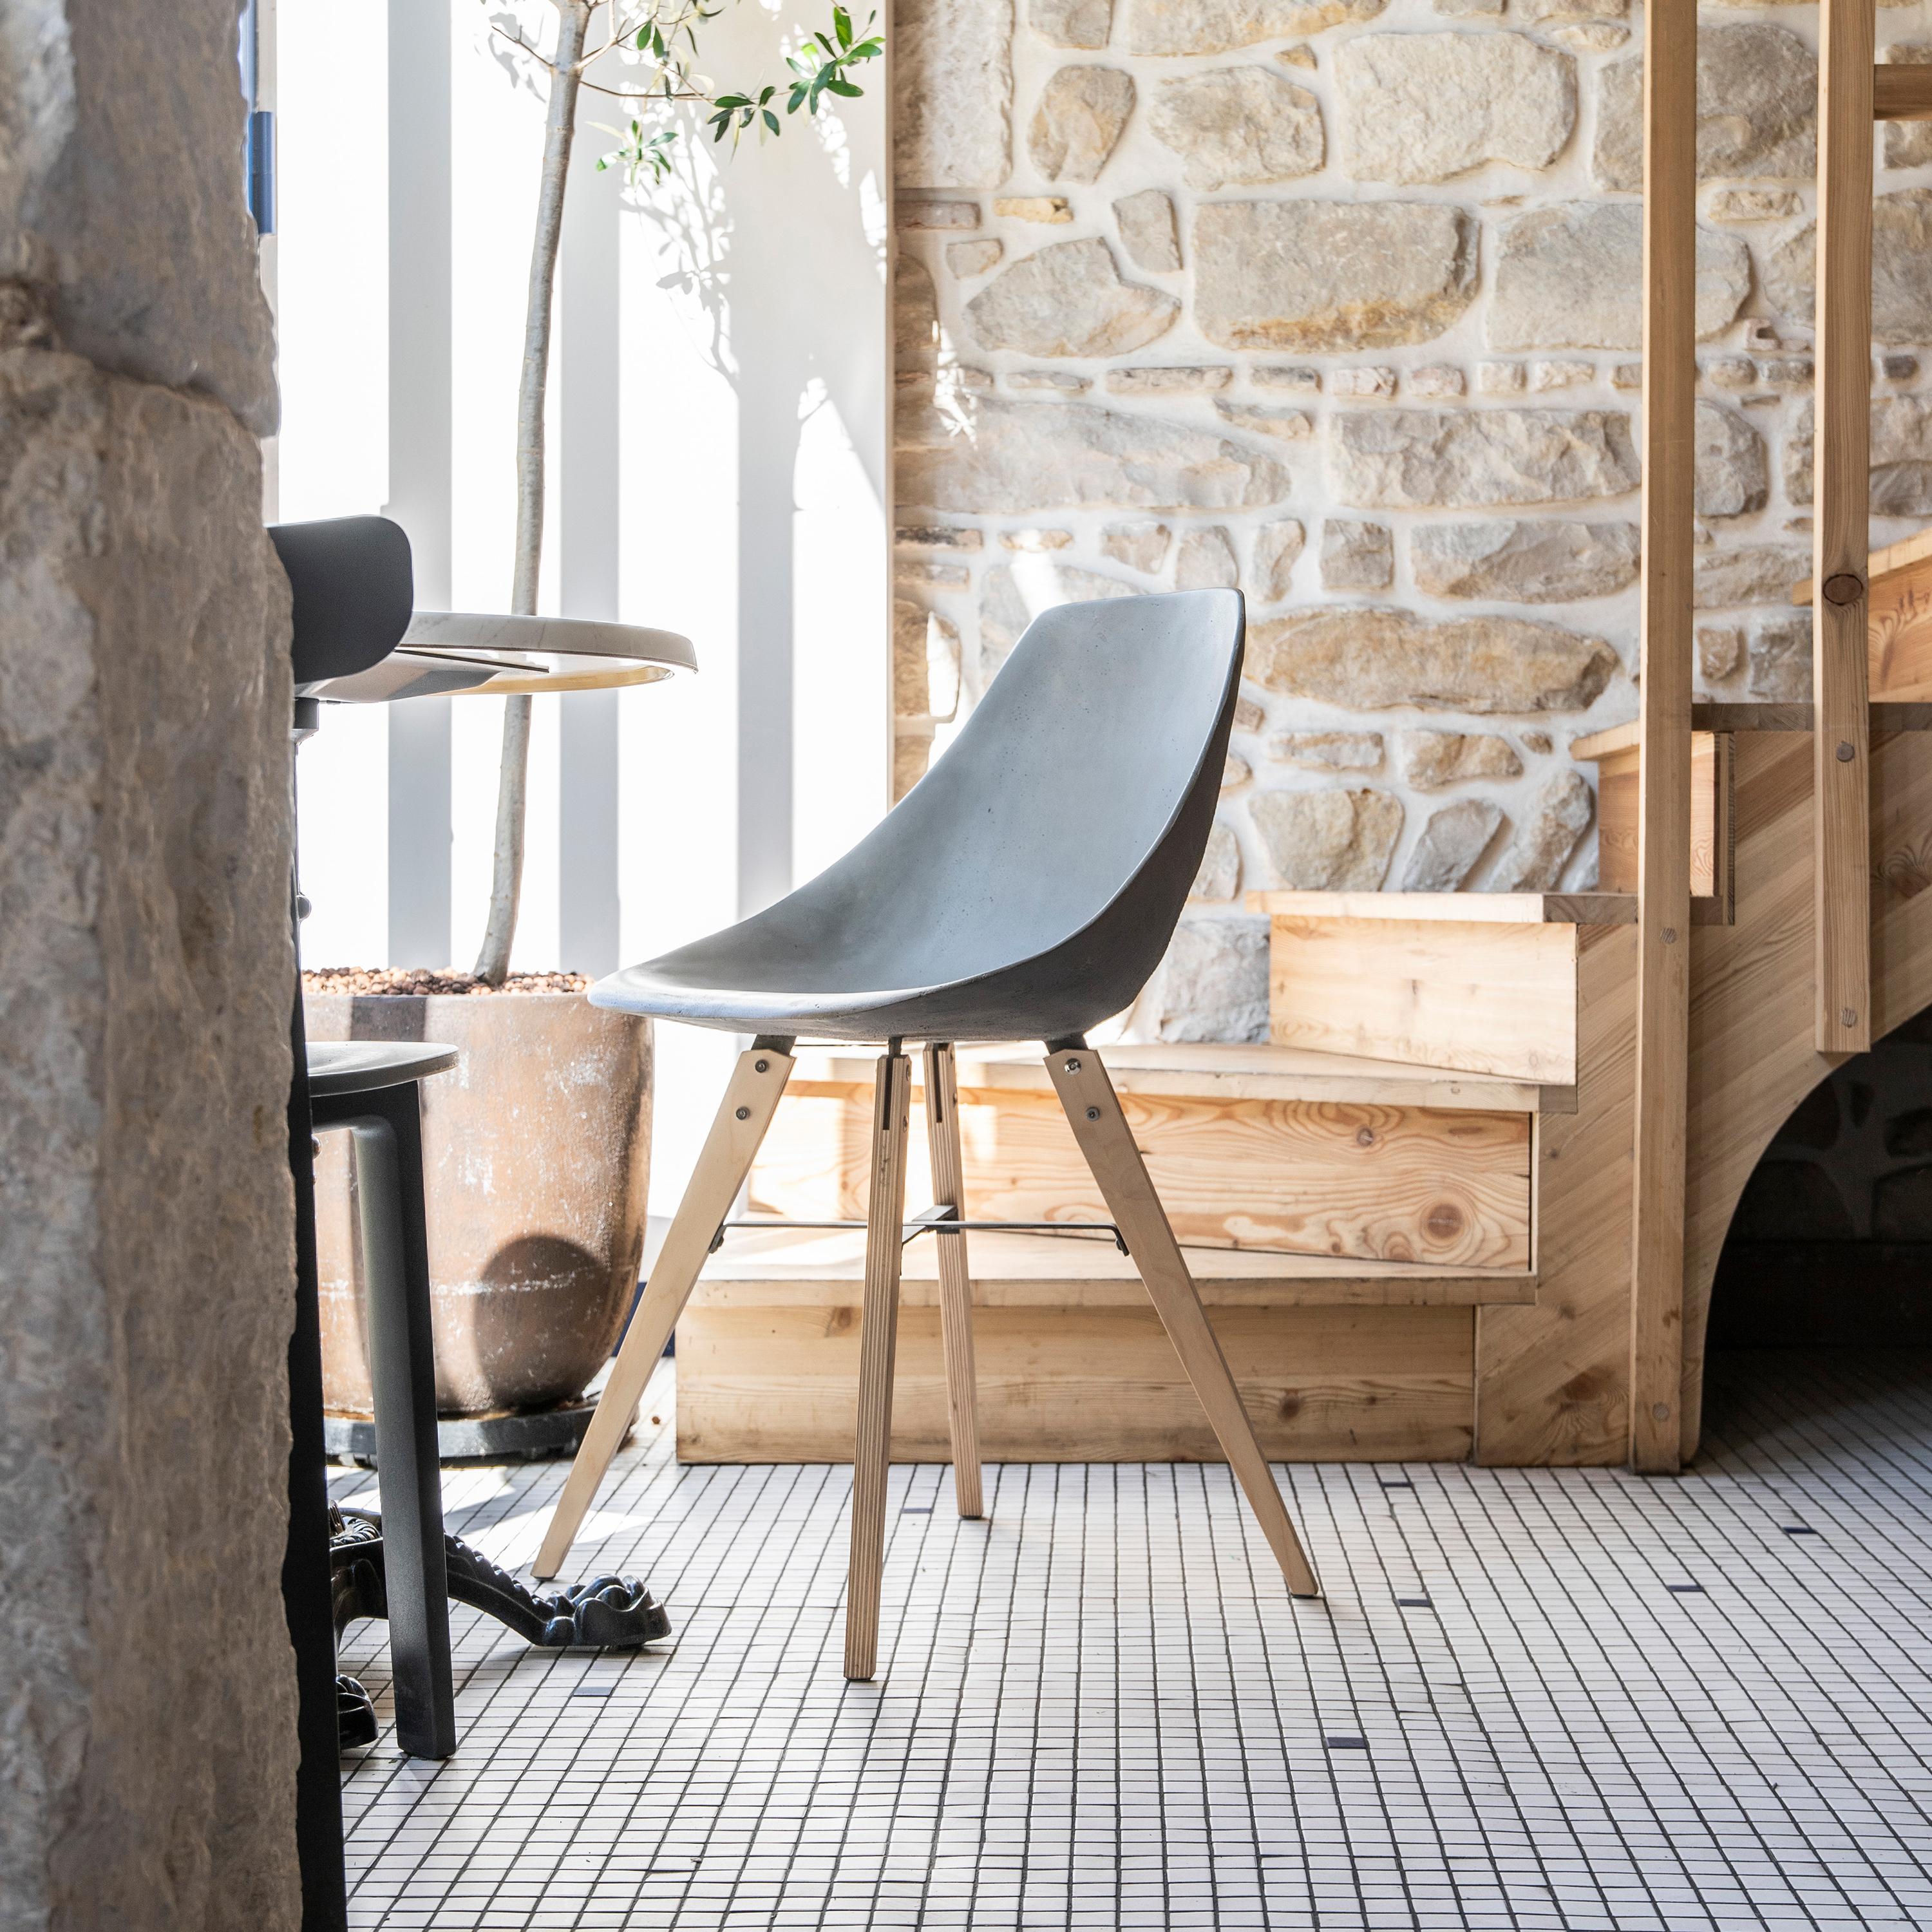 This version of our concrete Hauteville chair has a wooden base for a warmer look. The balance between brutalism and elegance remains. The legs are made of heavy­duty birch plywood.
The concrete seat perfectly cradles the curves of your body. It's